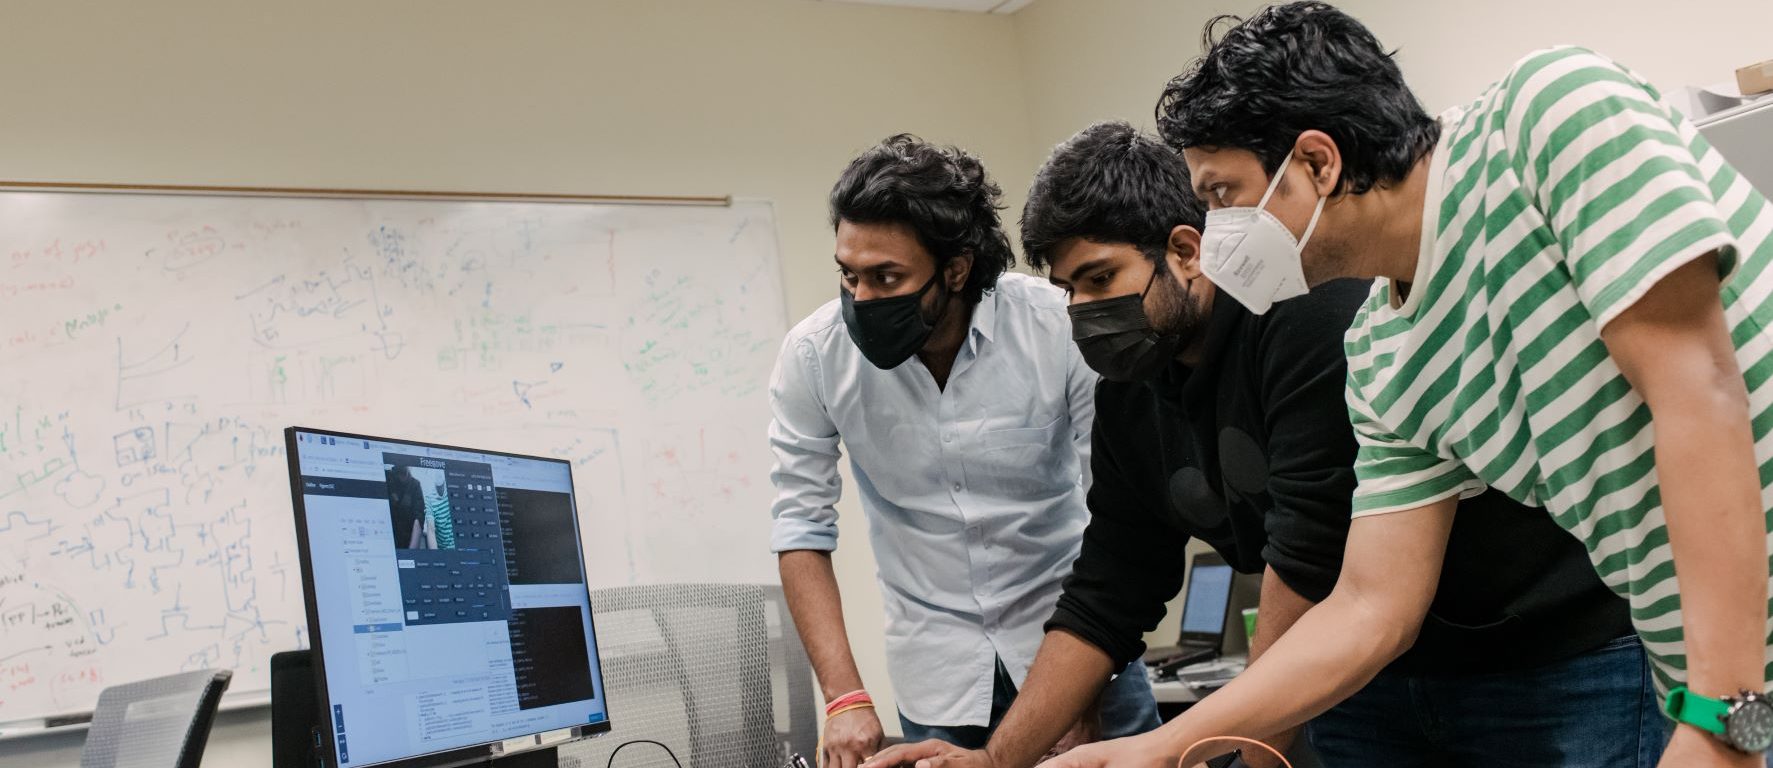 UMBC’s Riadul Islam receives NSF funding to secure cars against communication system attacks